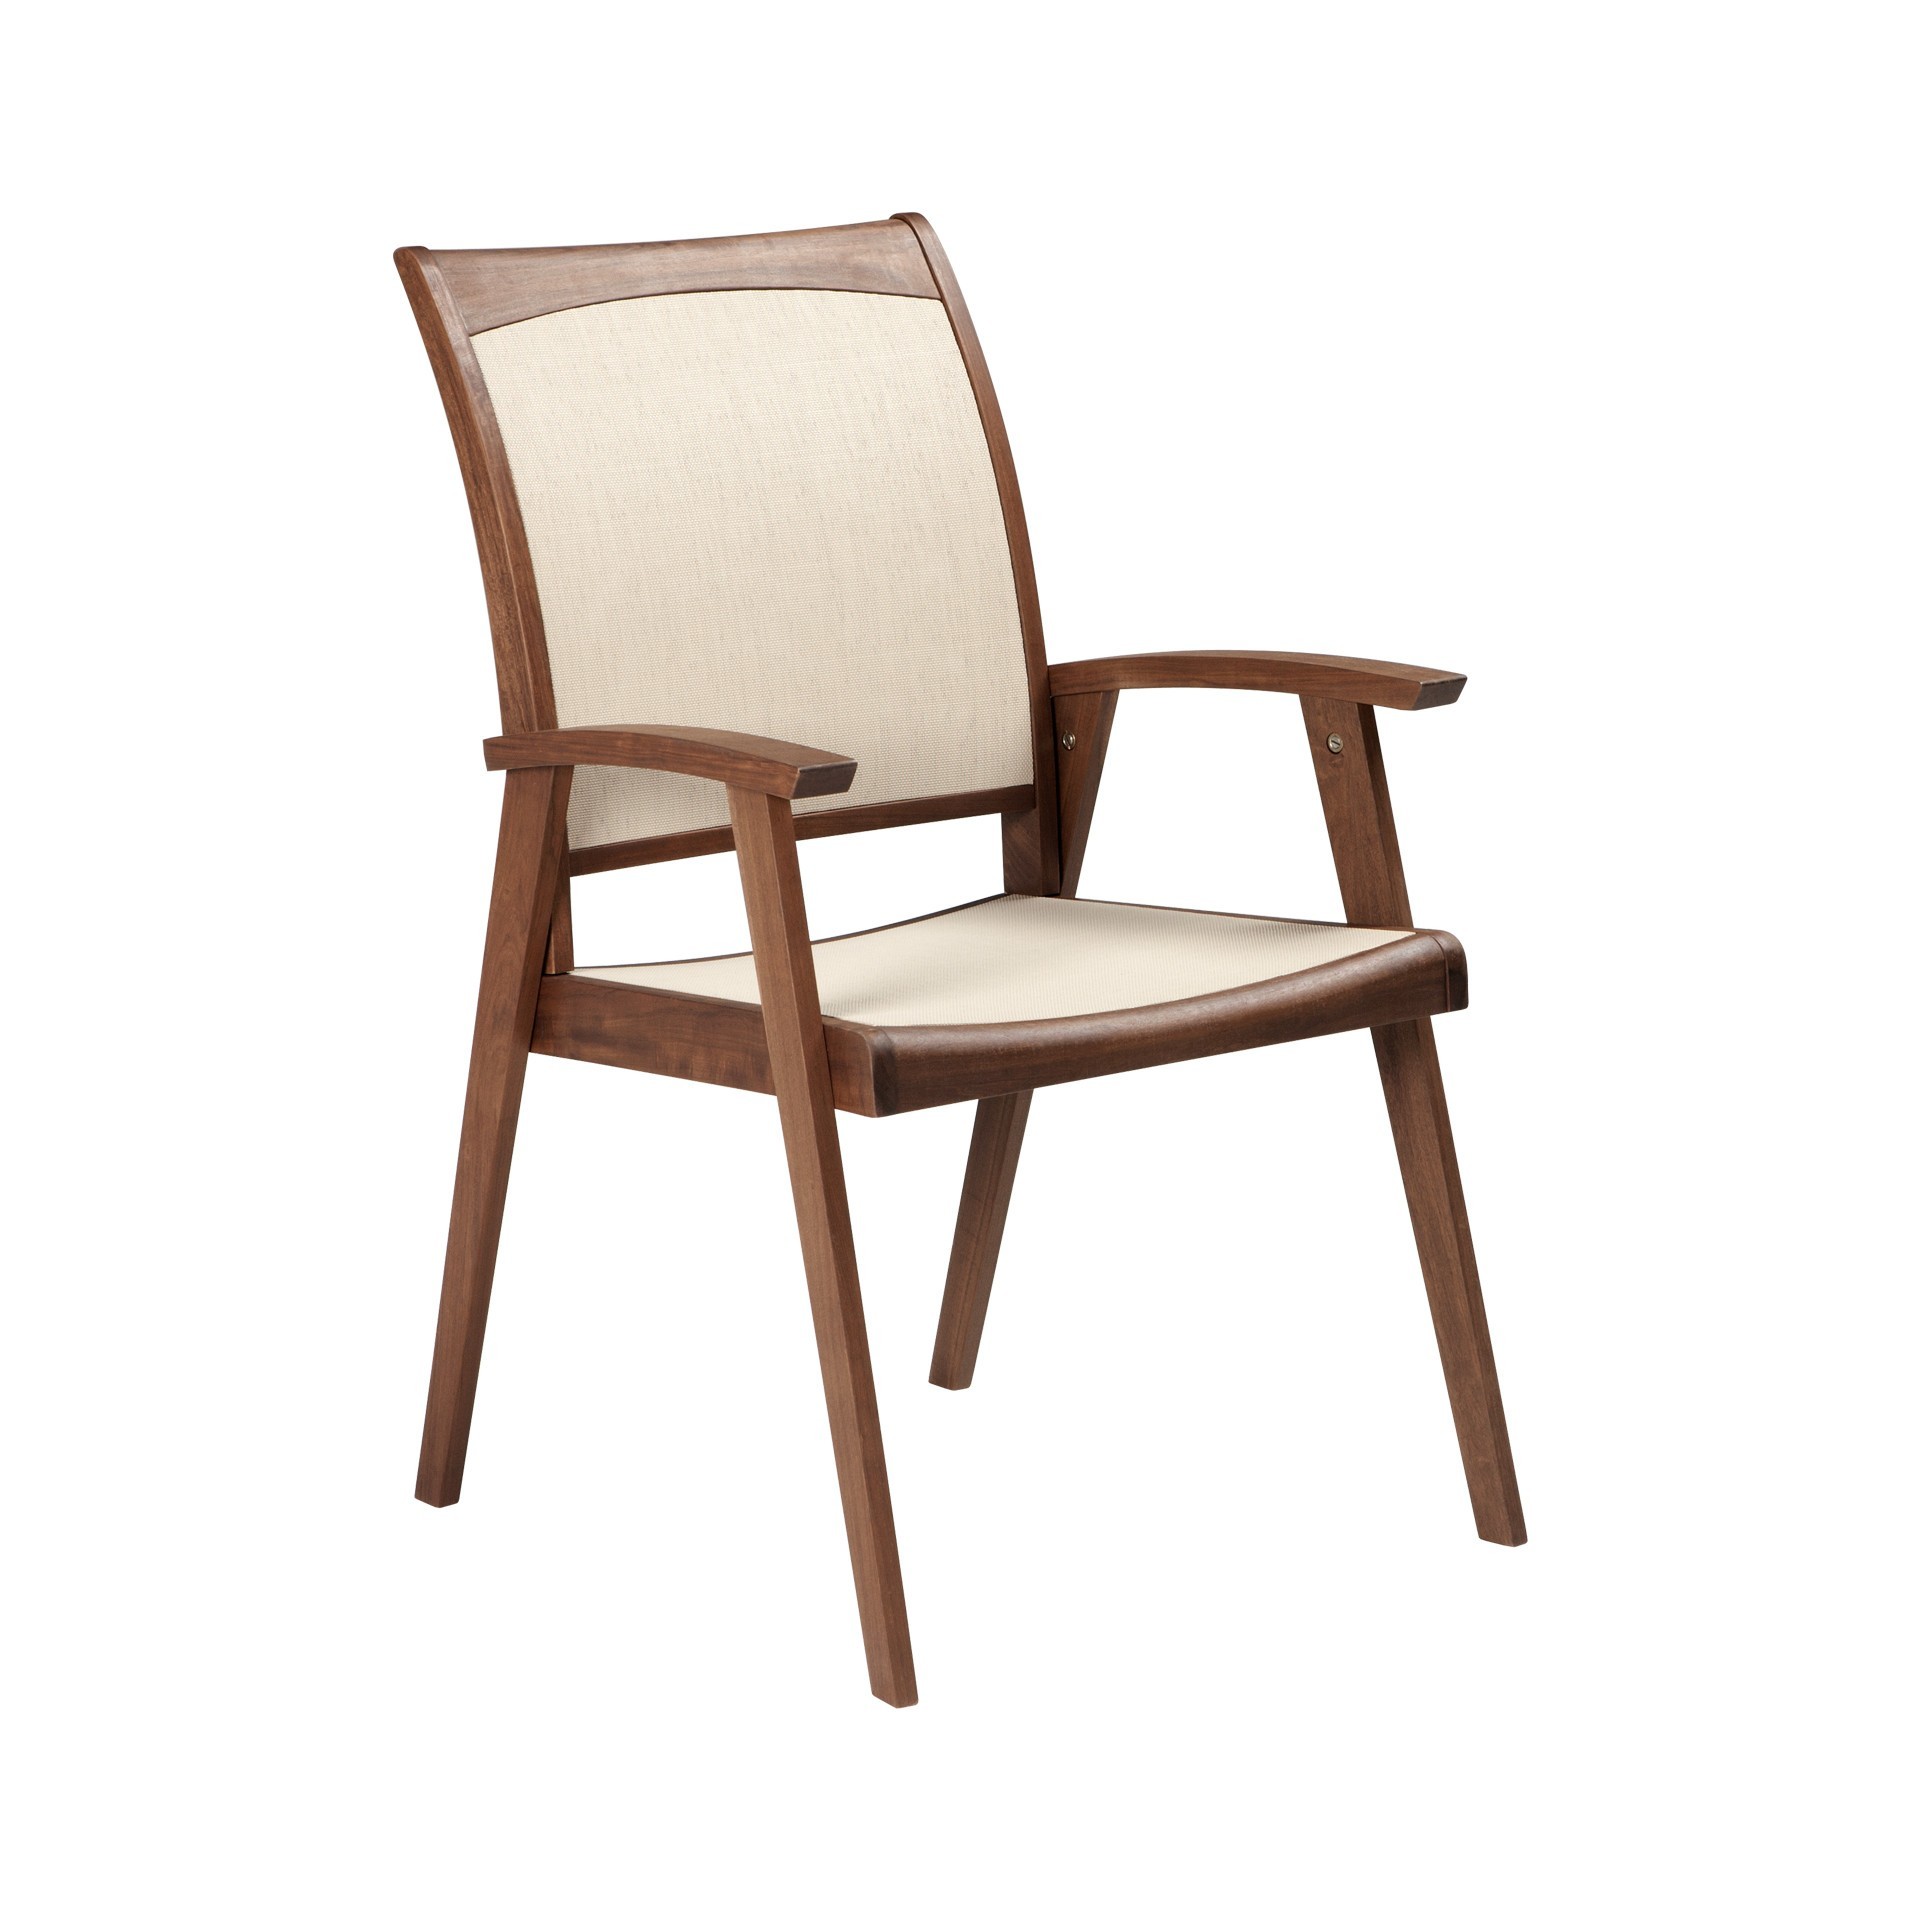 Wooden chair with beige accent